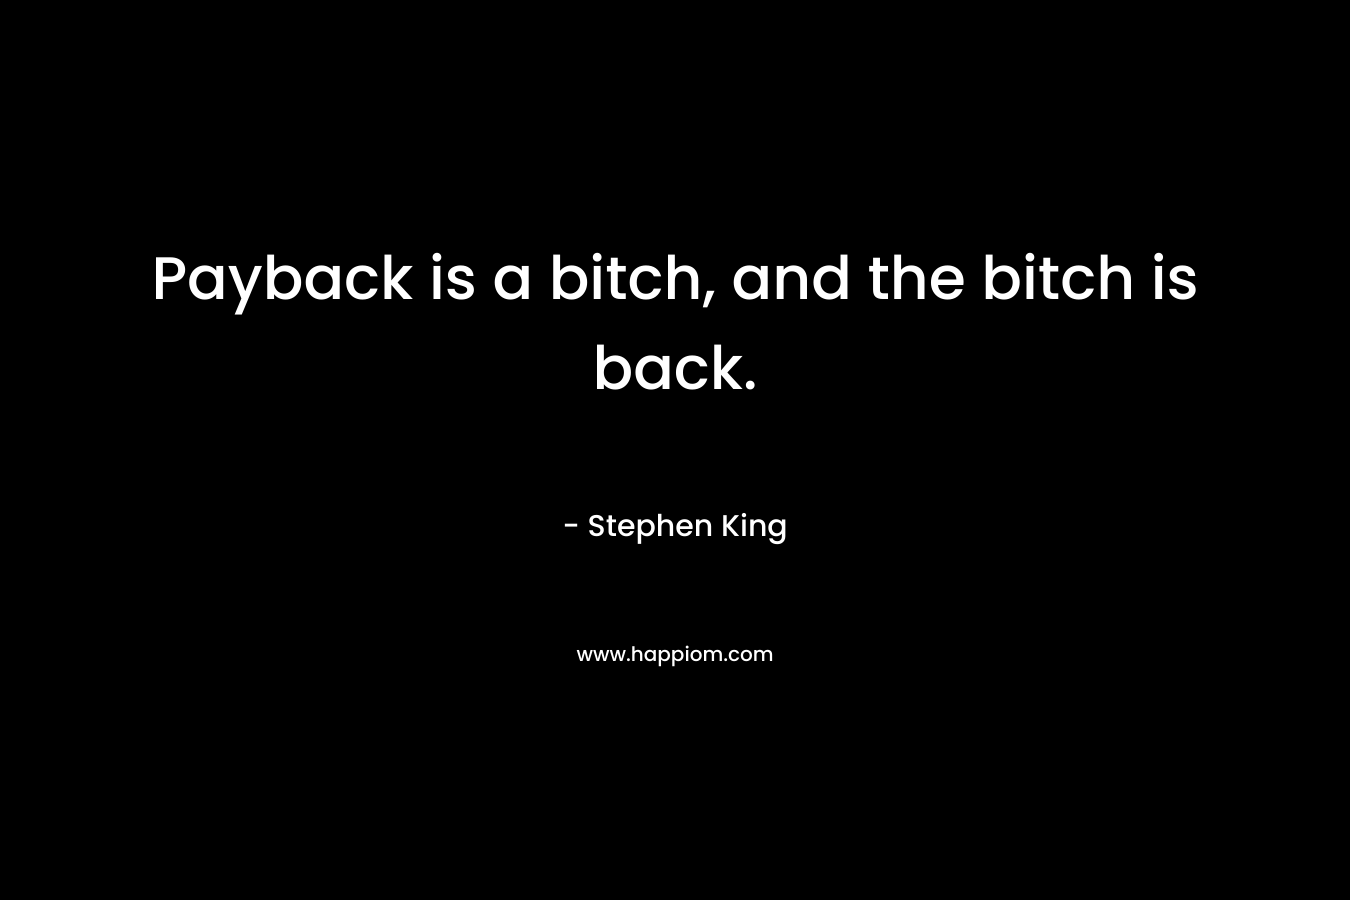 Payback is a bitch, and the bitch is back. – Stephen King